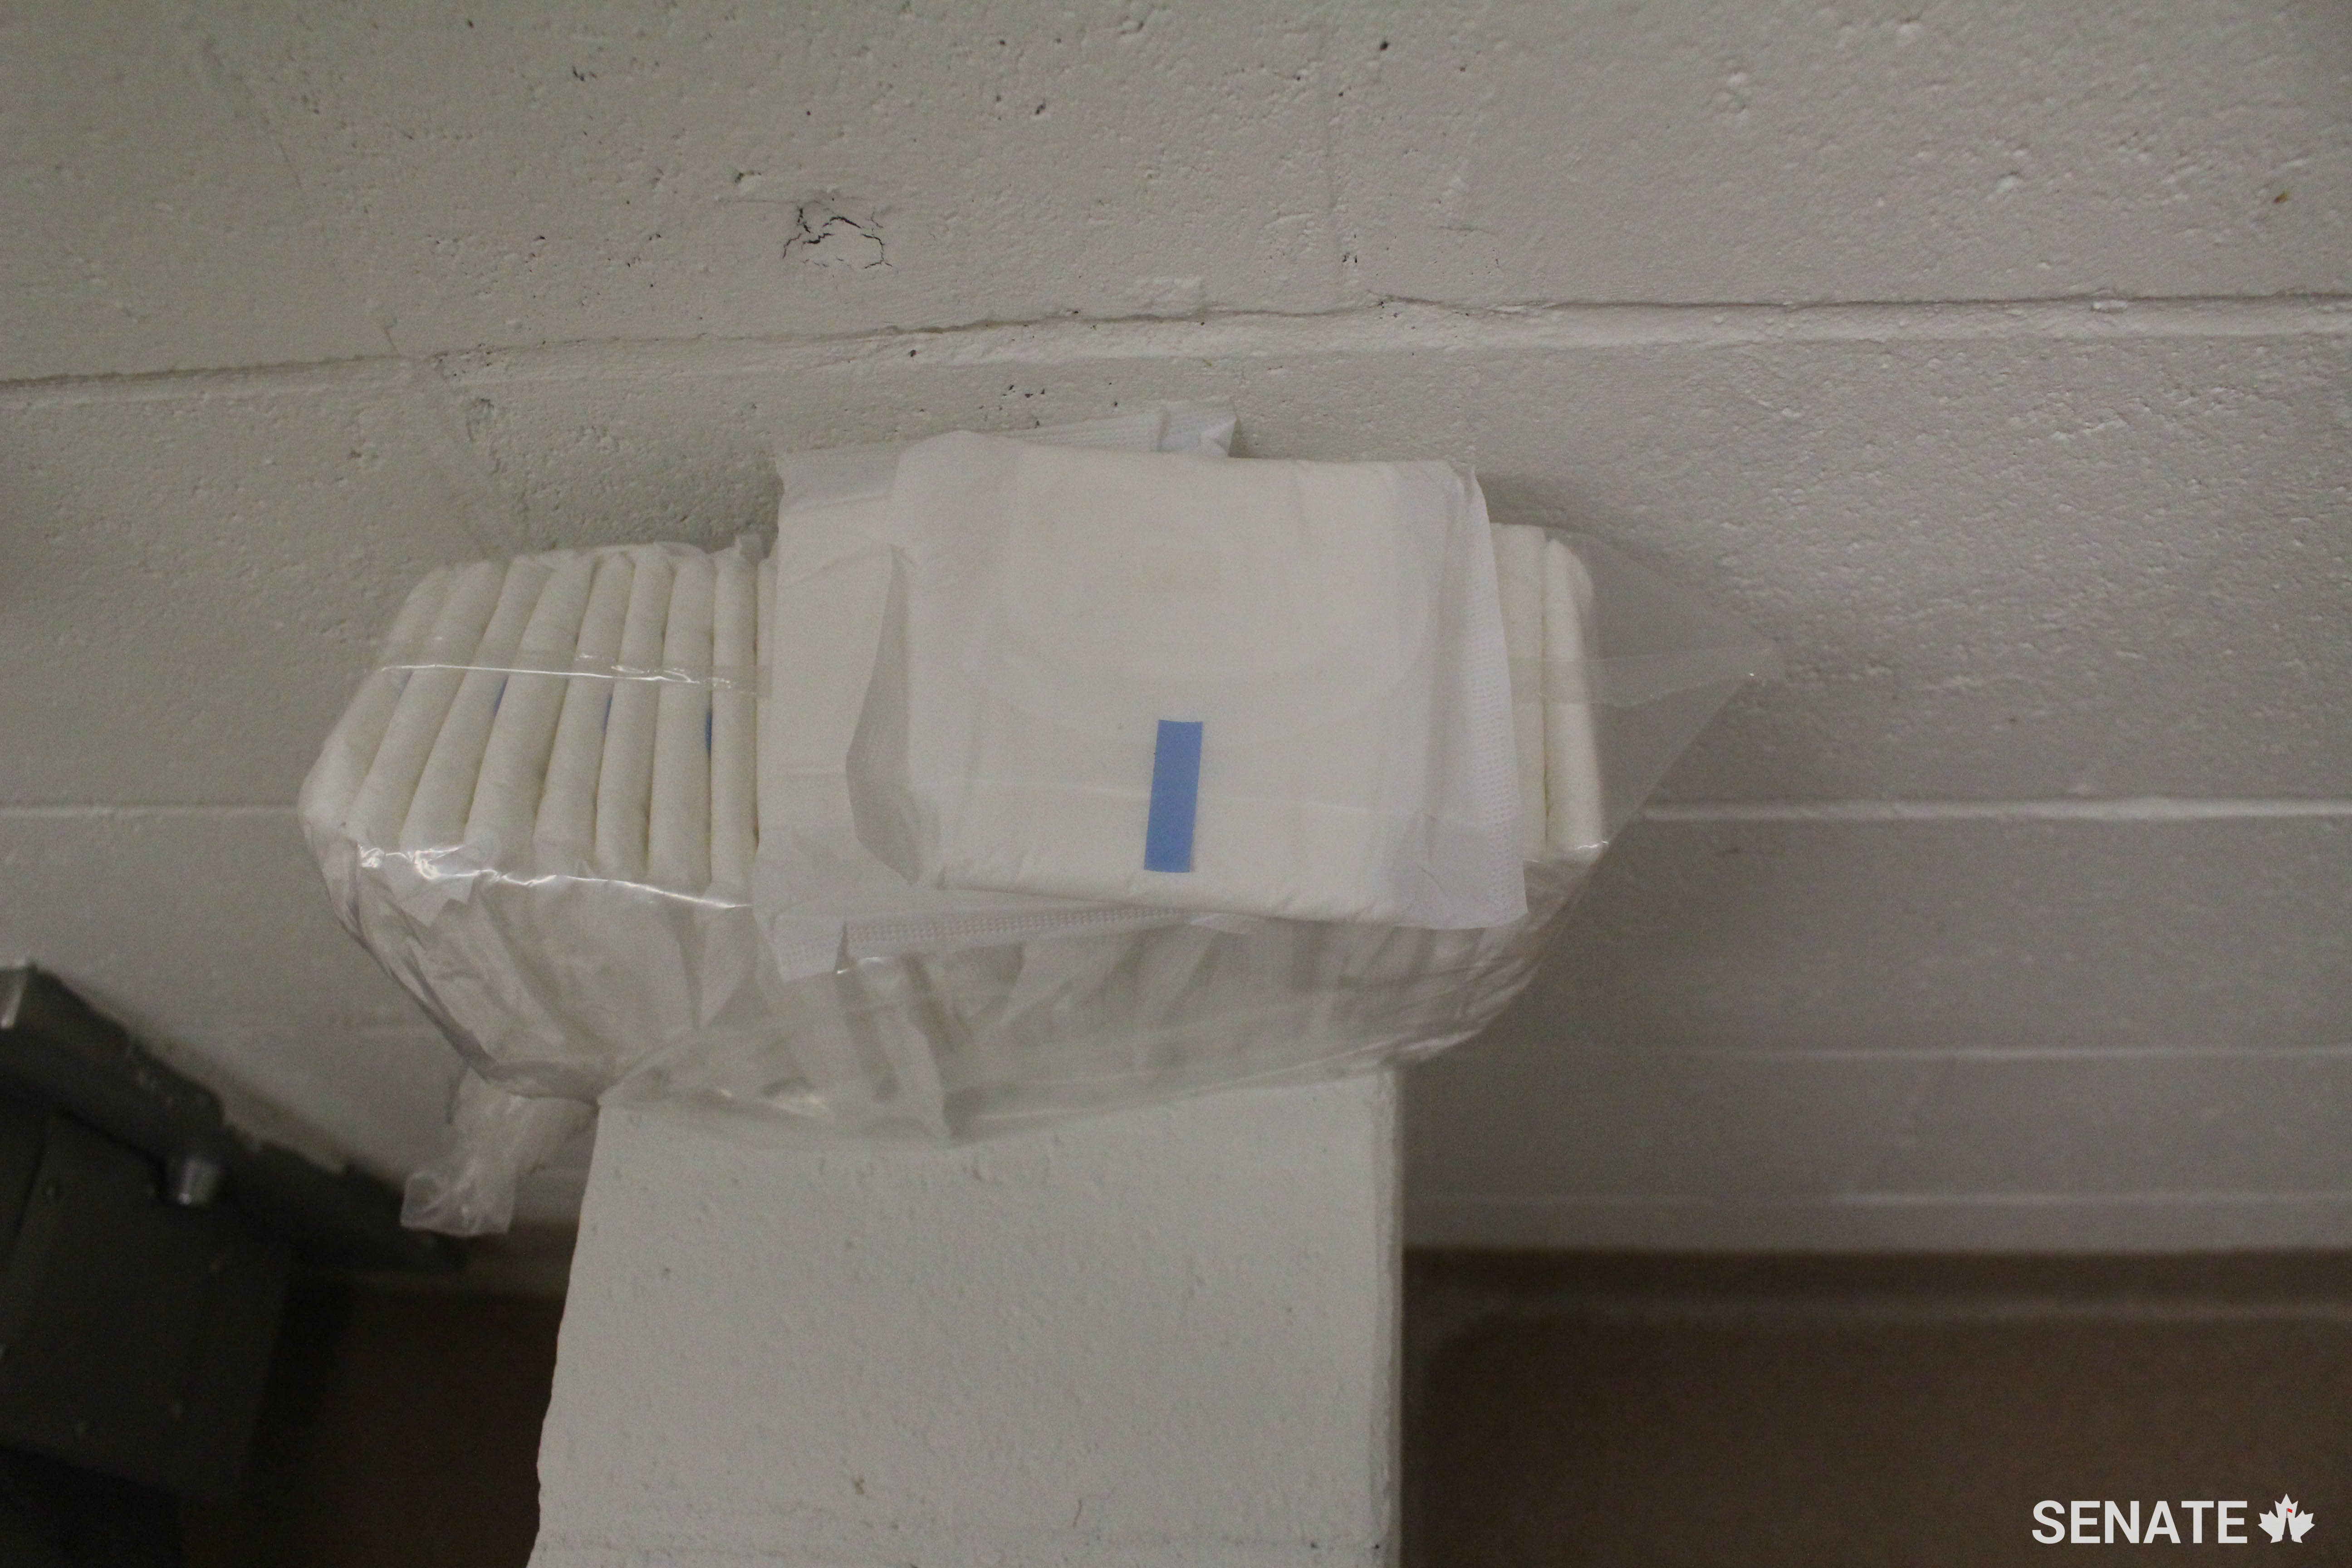 Prisoners at Joliette Institution are only given one kind of sanitary pad; anything else must be purchased.